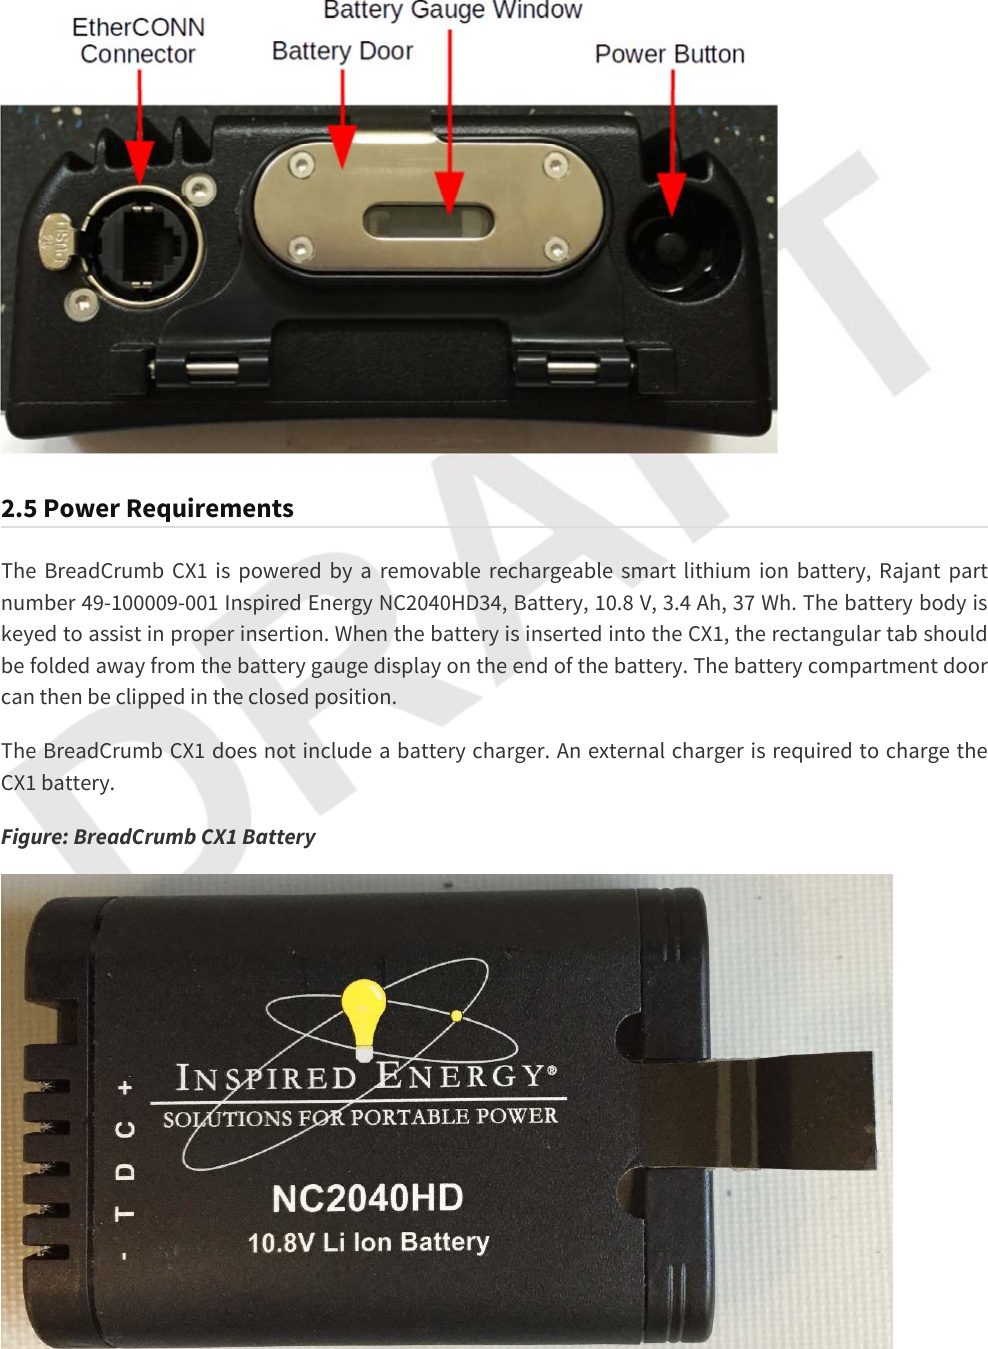 2.5 Power RequirementsThe BreadCrumb CX1 is powered by a removable rechargeable smart lithium ion battery, Rajant part number 49-100009-001 Inspired Energy NC2040HD34, Battery, 10.8 V, 3.4 Ah, 37 Wh. The battery body is keyed to assist in proper insertion. When the battery is inserted into the CX1, the rectangular tab should be folded away from the battery gauge display on the end of the battery. The battery compartment door can then be clipped in the closed position.The BreadCrumb CX1 does not include a battery charger. An external charger is required to charge the CX1 battery.Figure: BreadCrumb CX1 Battery